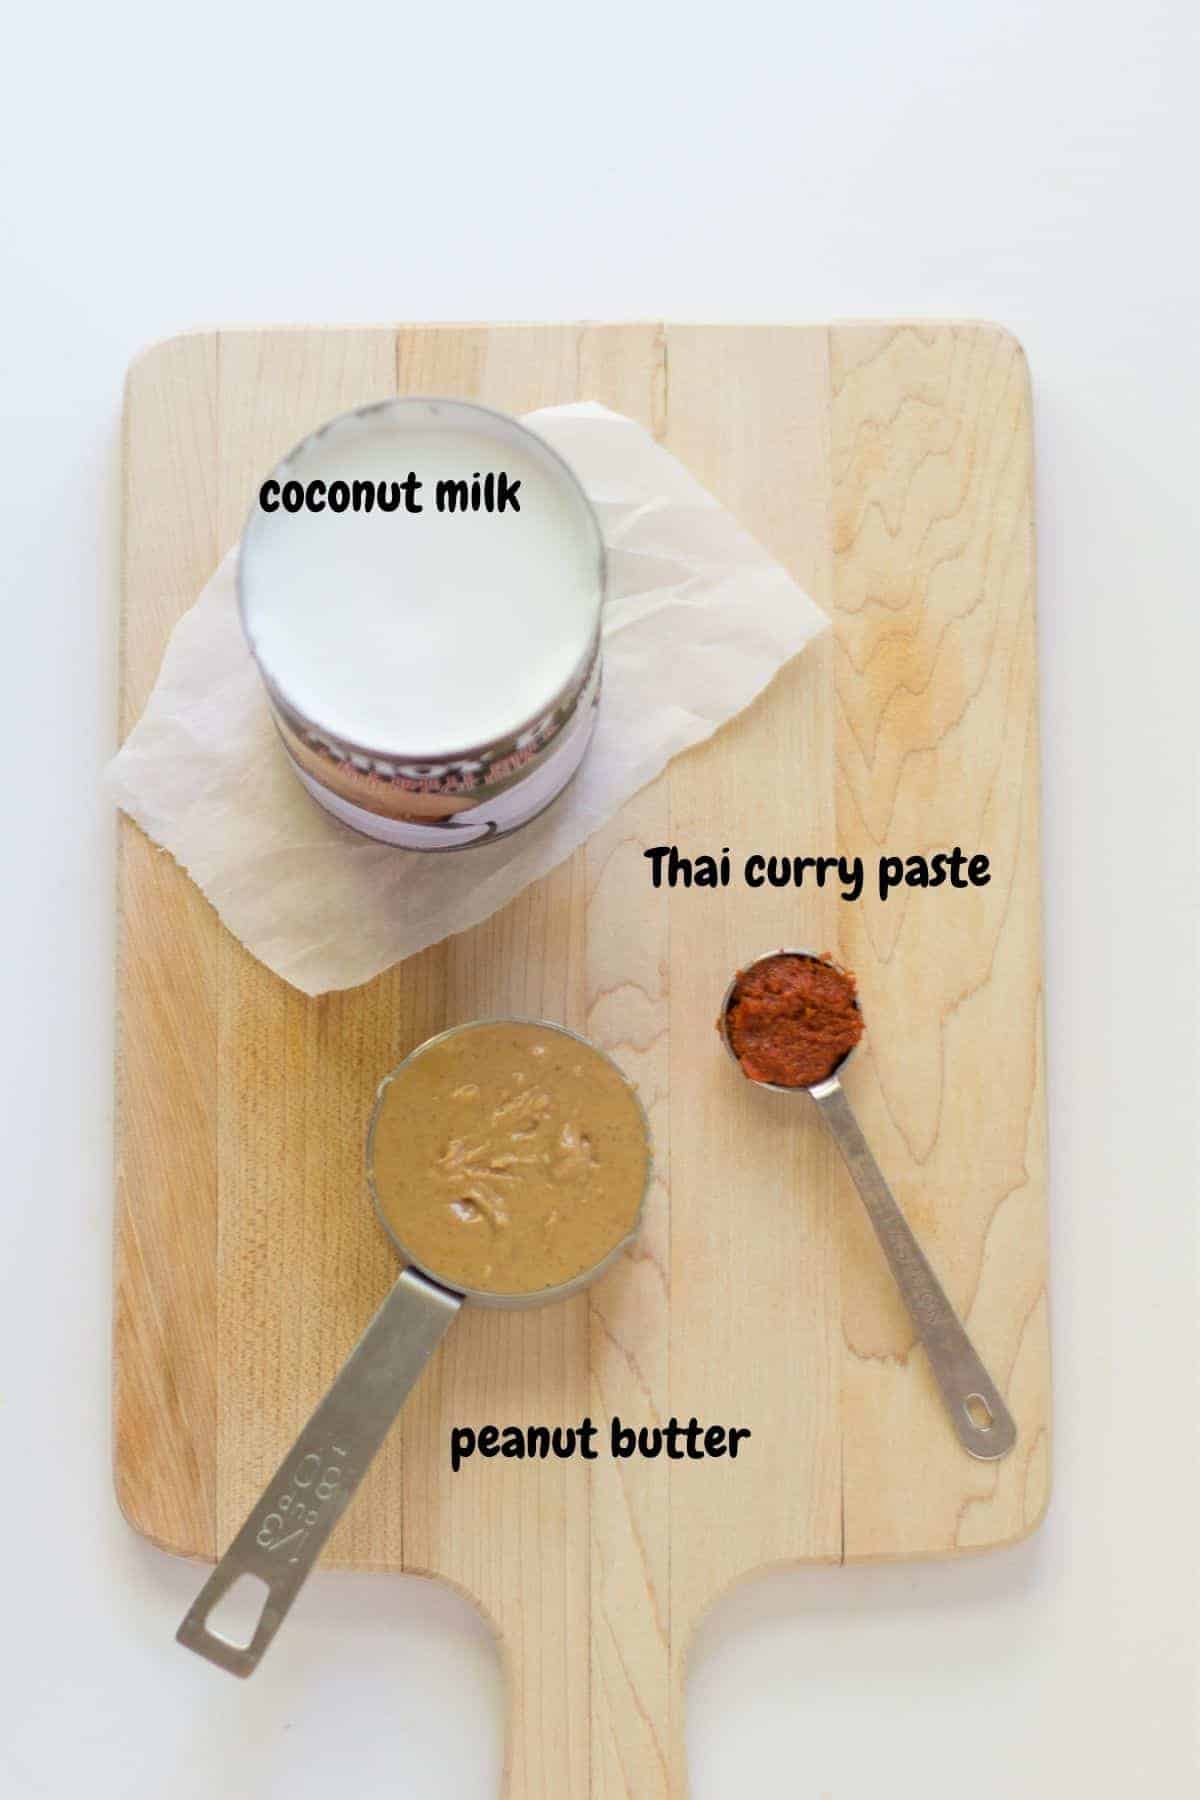 coconut milk, curry paste, and peanut butter laid out on a wooden board